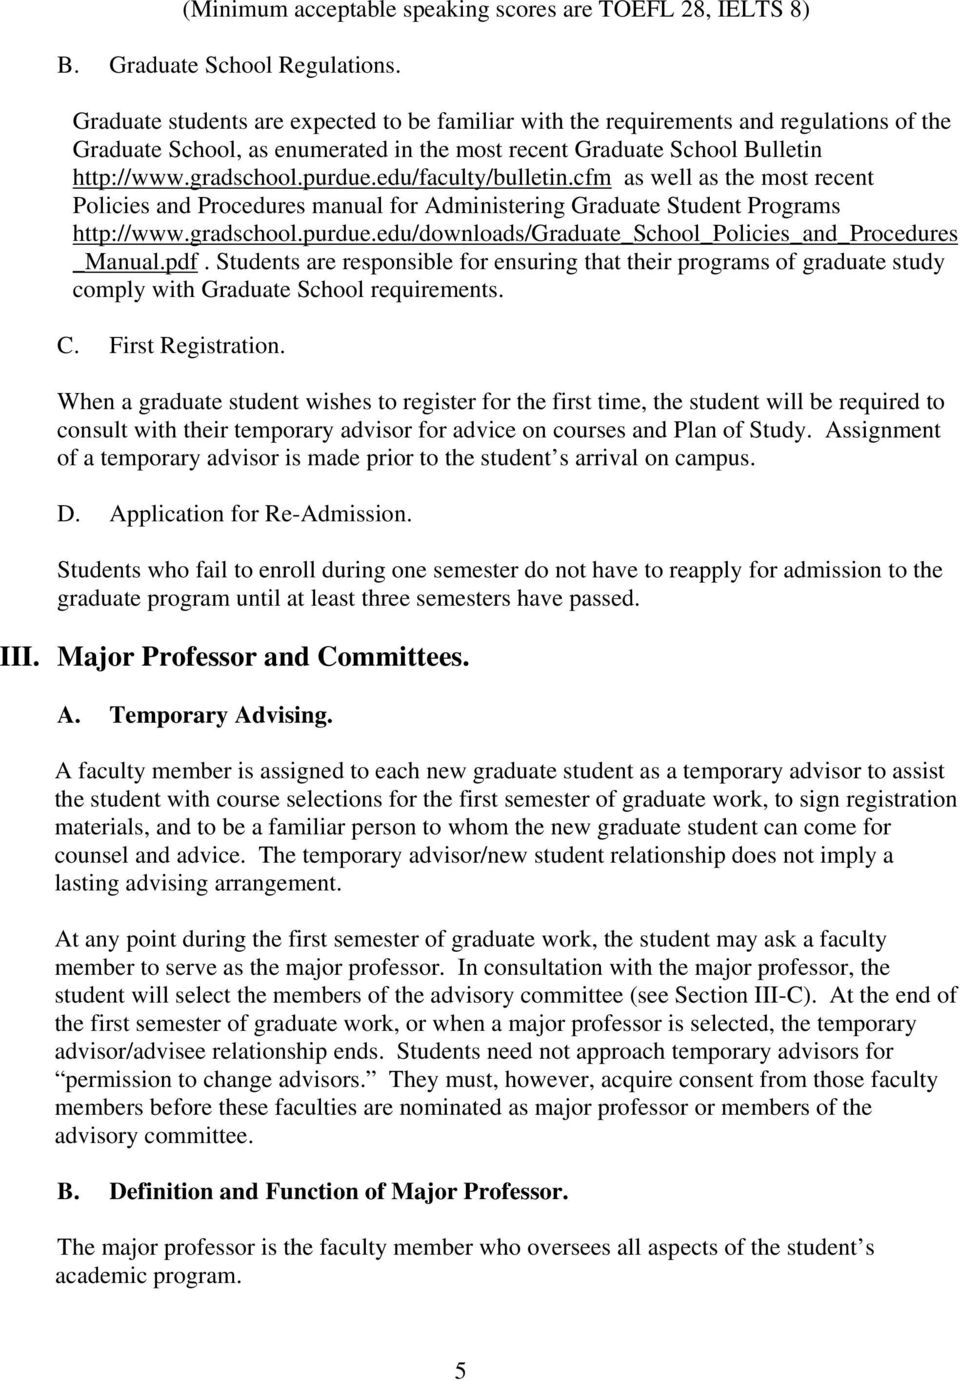 edu/faculty/bulletin.cfm as well as the most recent Policies and Procedures manual for Administering Graduate Student Programs http://www.gradschool.purdue.